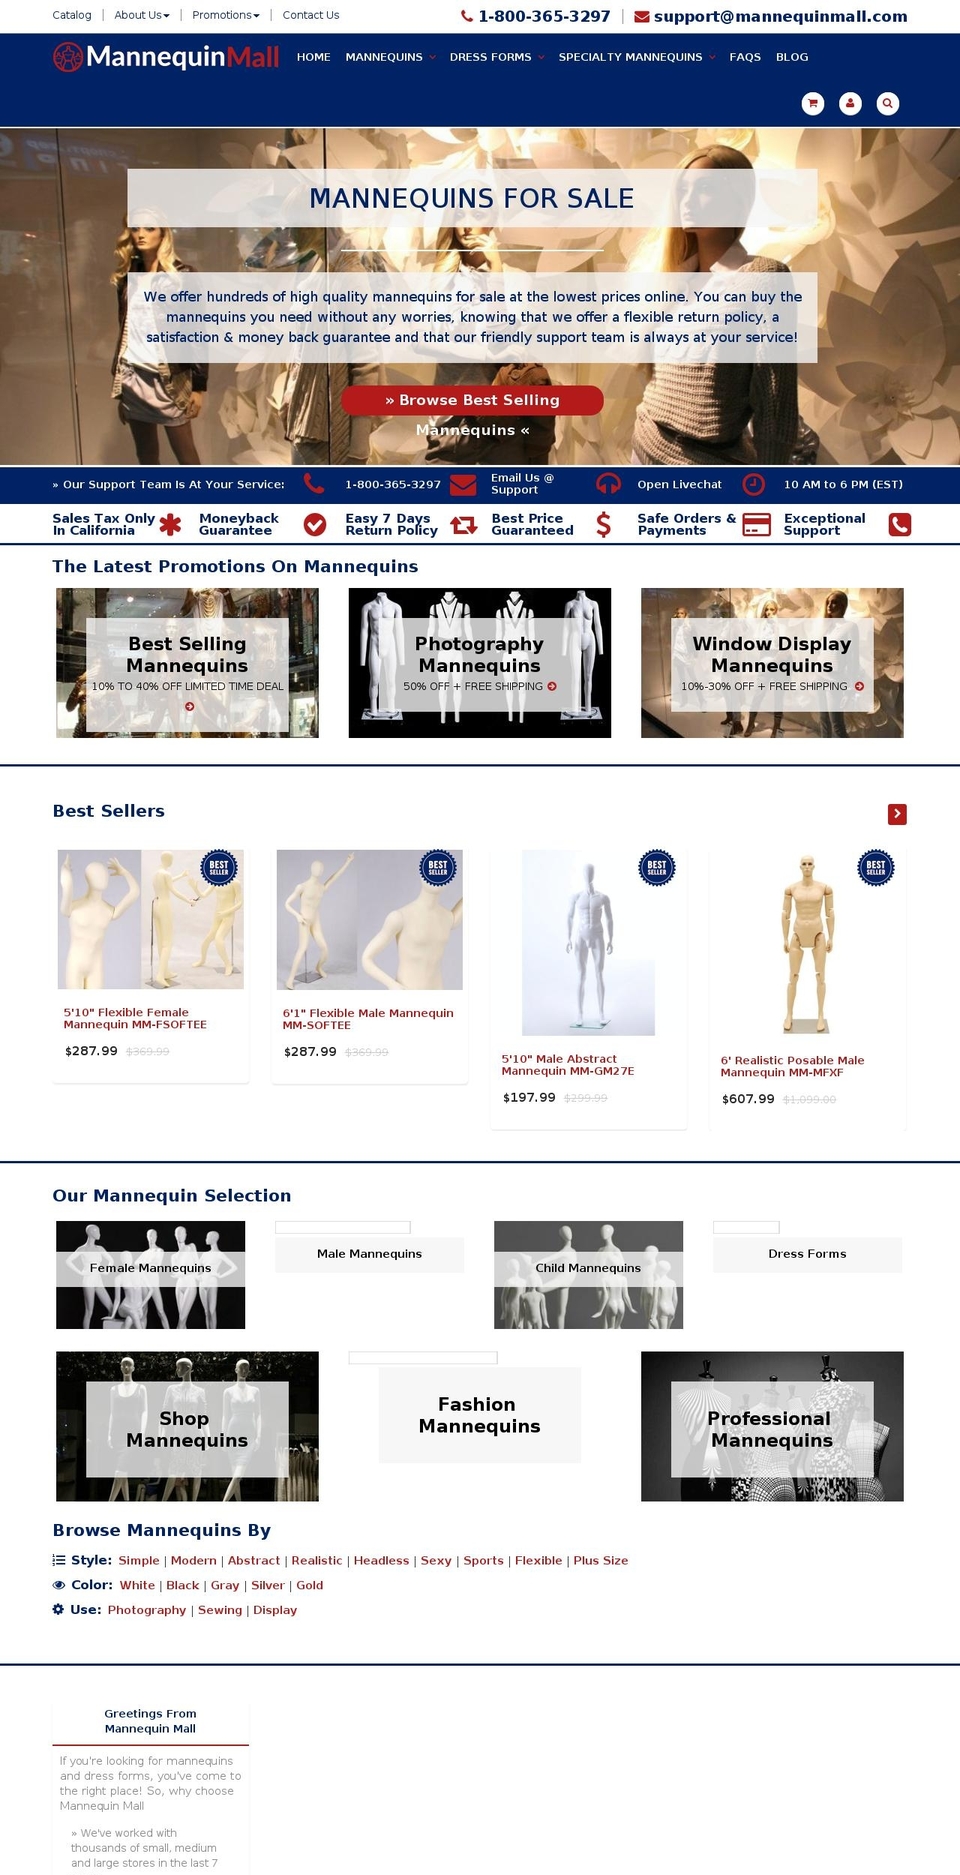 turbo Shopify theme site example mannequinmall.com